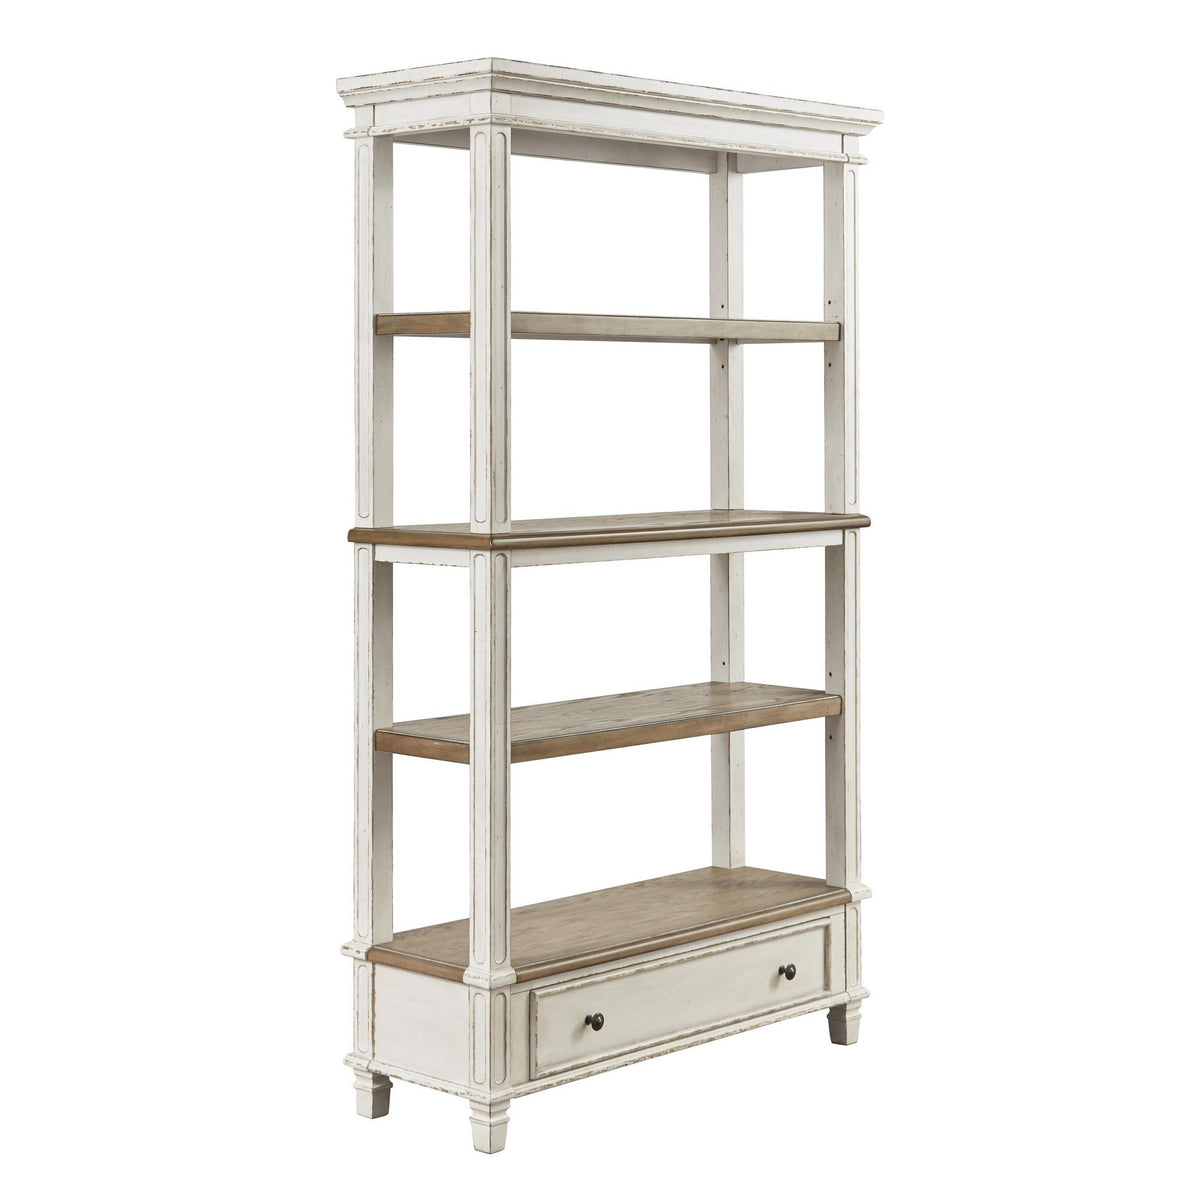 Wooden Bookcase with 4 Tier Shelves and Bottom Drawer in Brown and White - BM213228